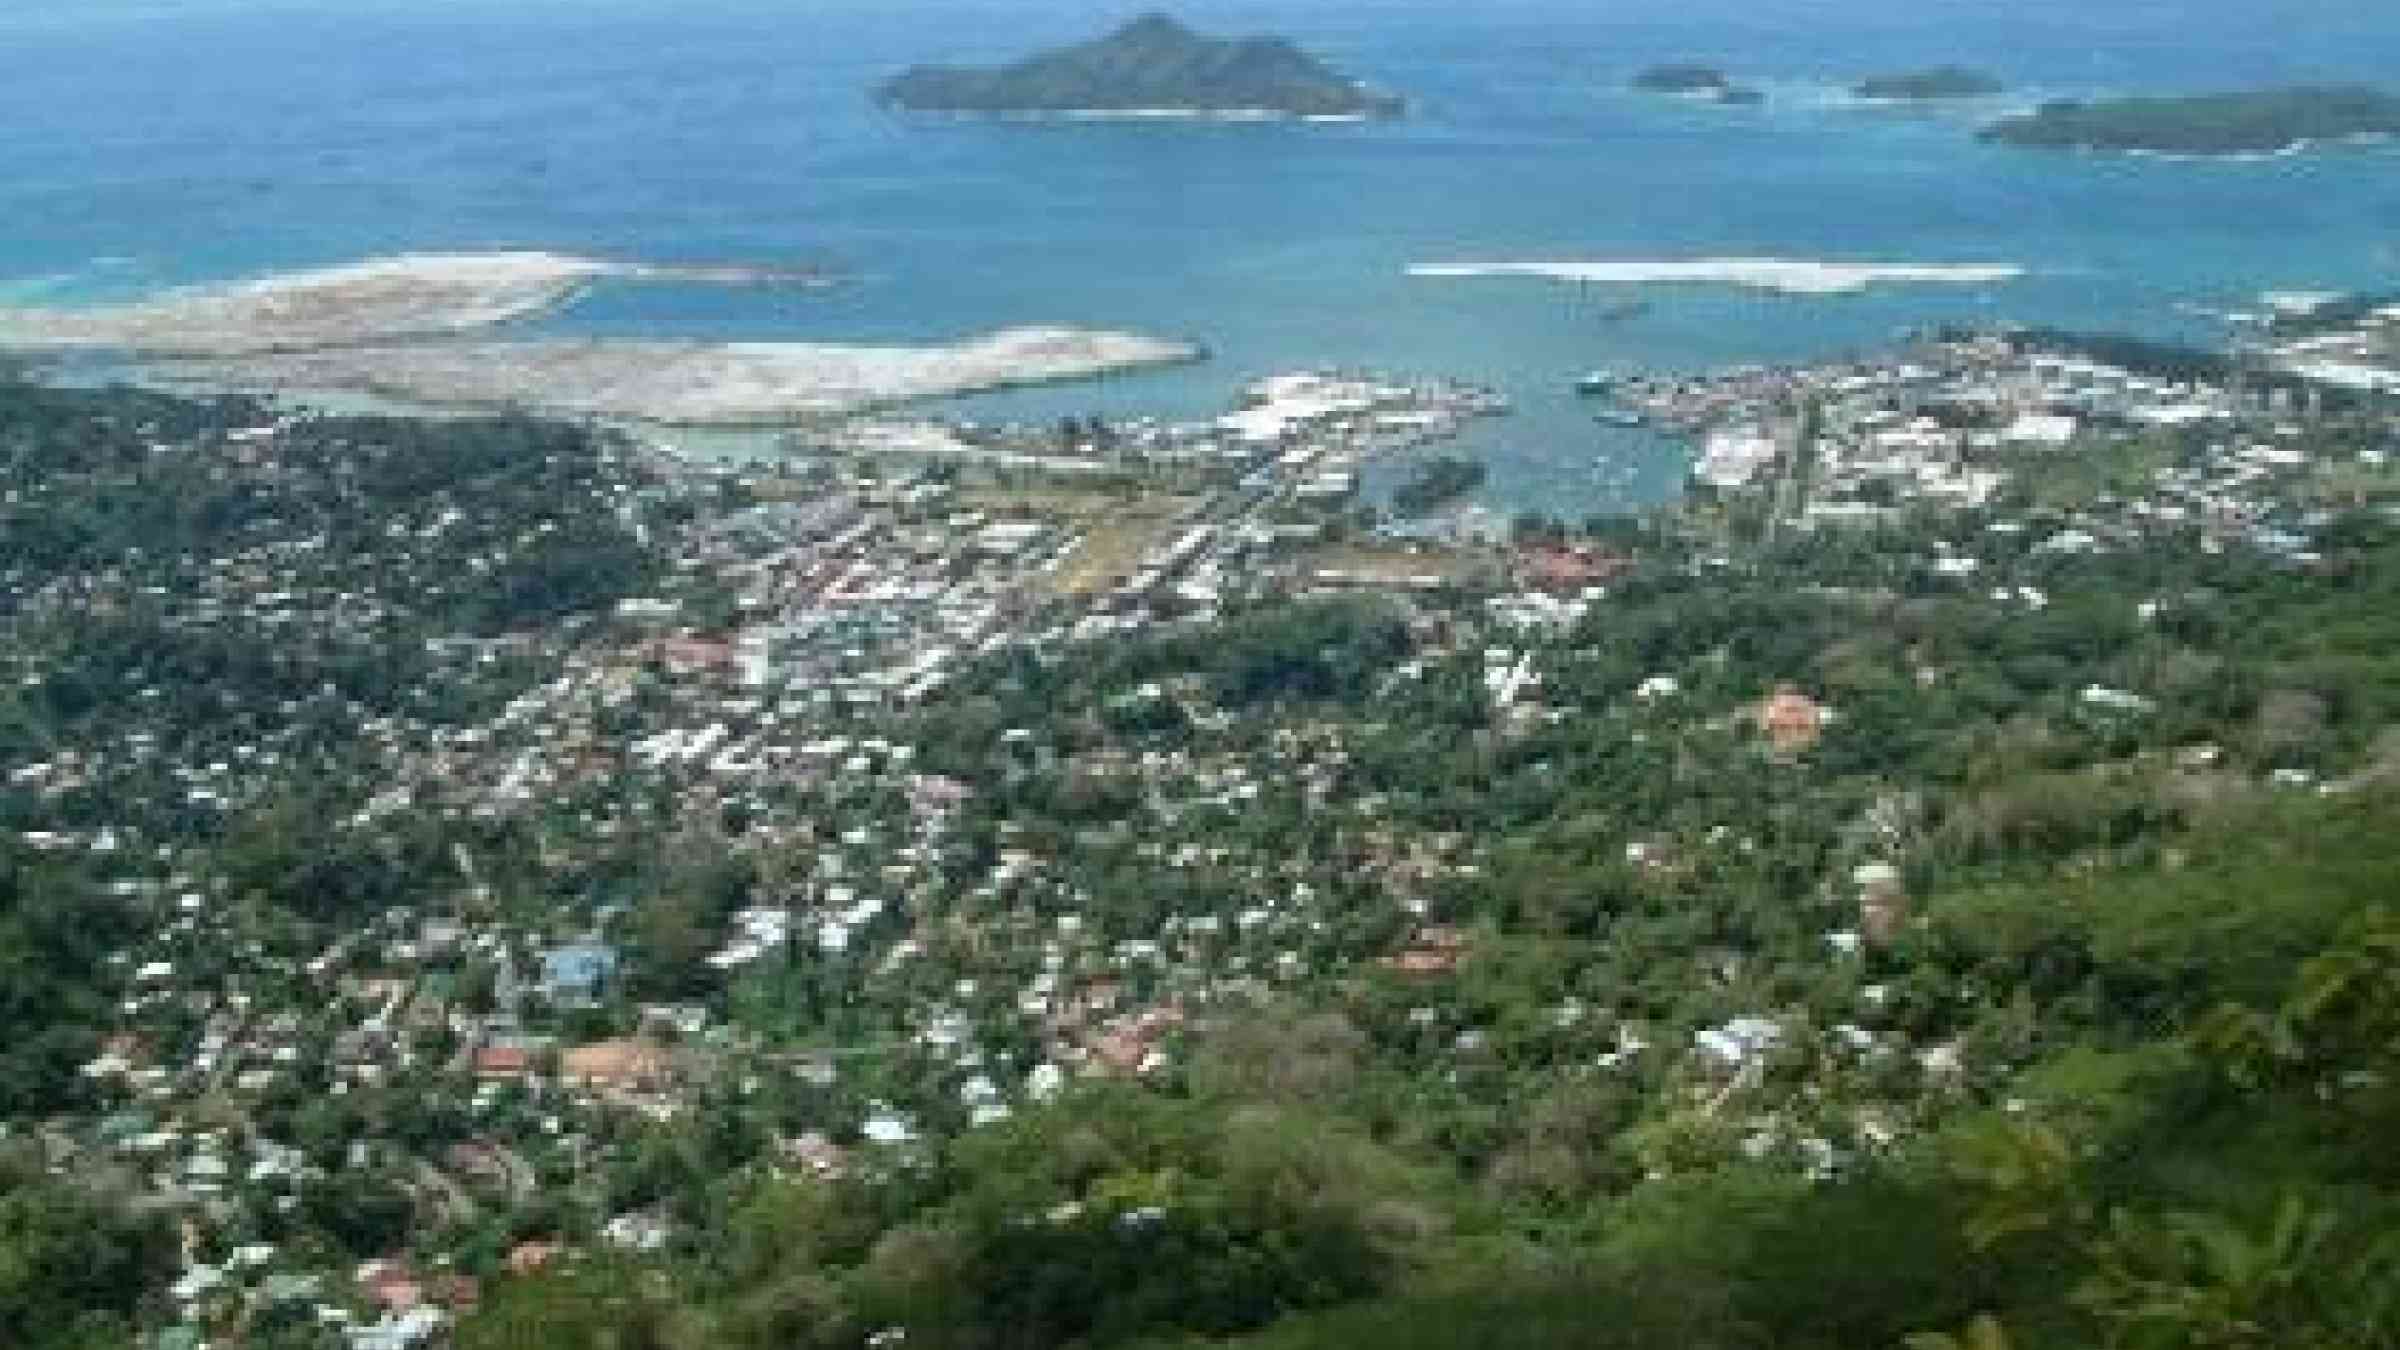 The Seychelles capital Victoria is home to key national infrastructure whose tsunami-readiness was tested during September's IOWave16 drill